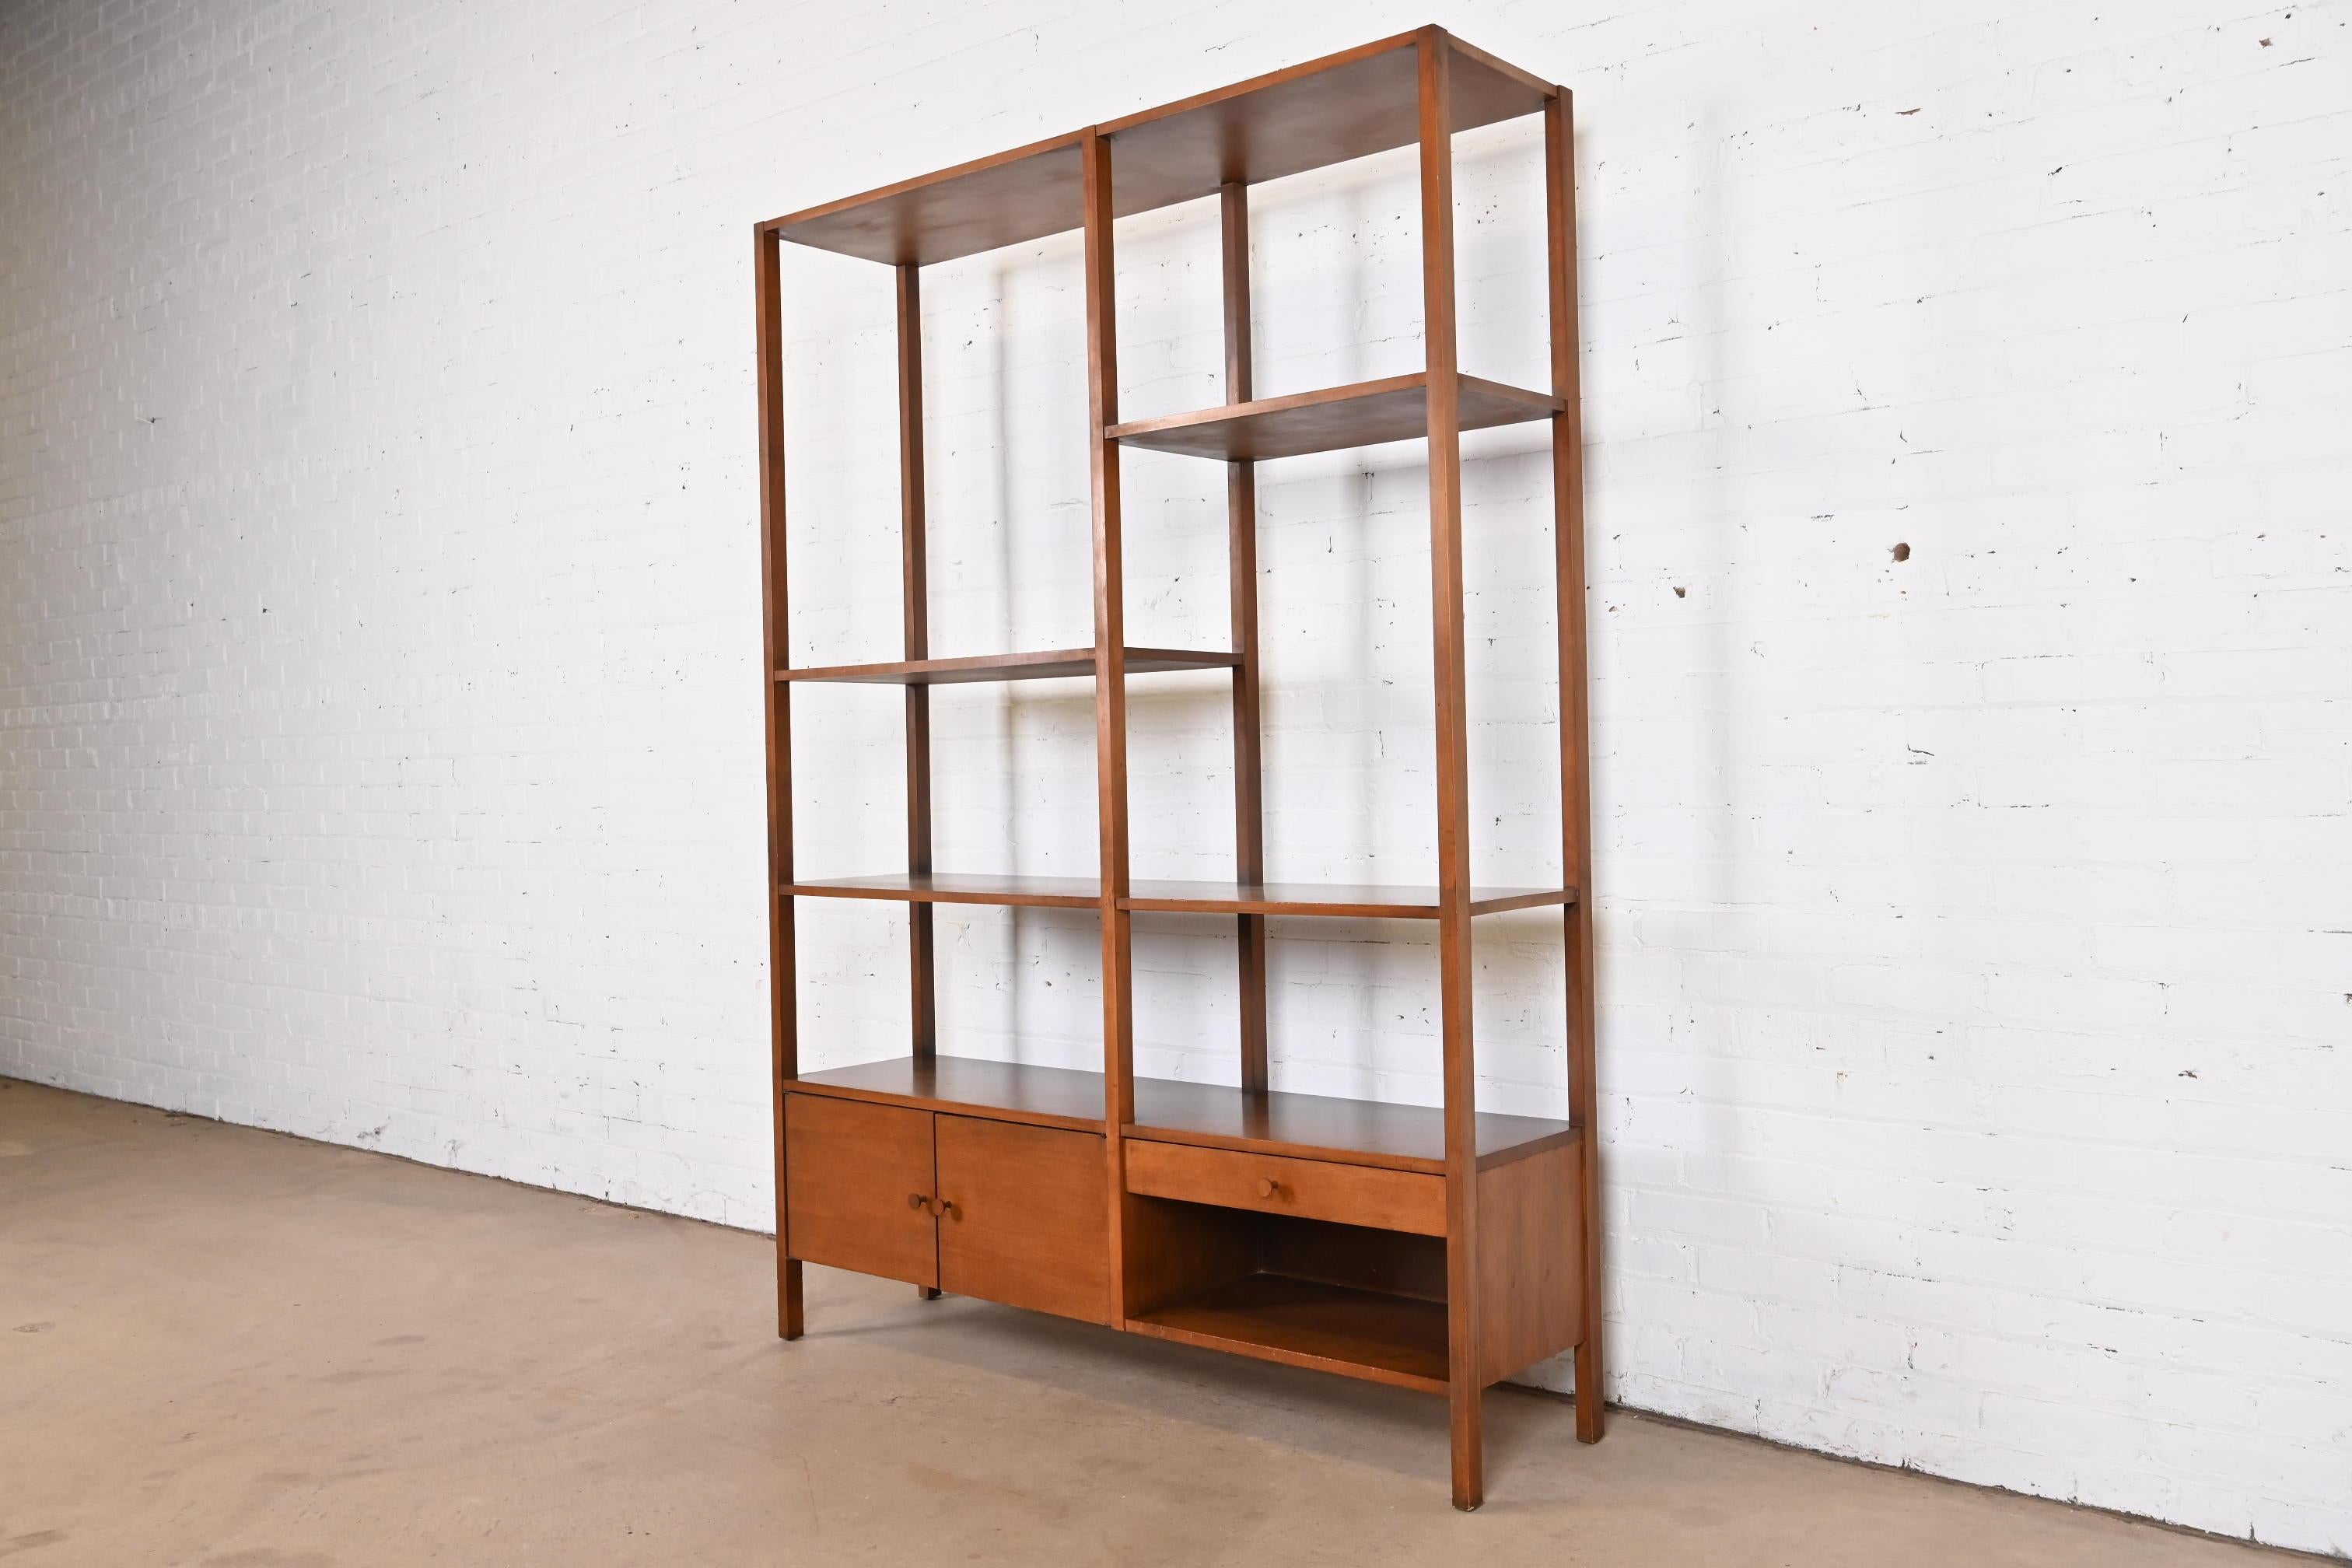 American Paul McCobb Planner Group Mid-Century Modern Birch Room Divider or Wall Unit